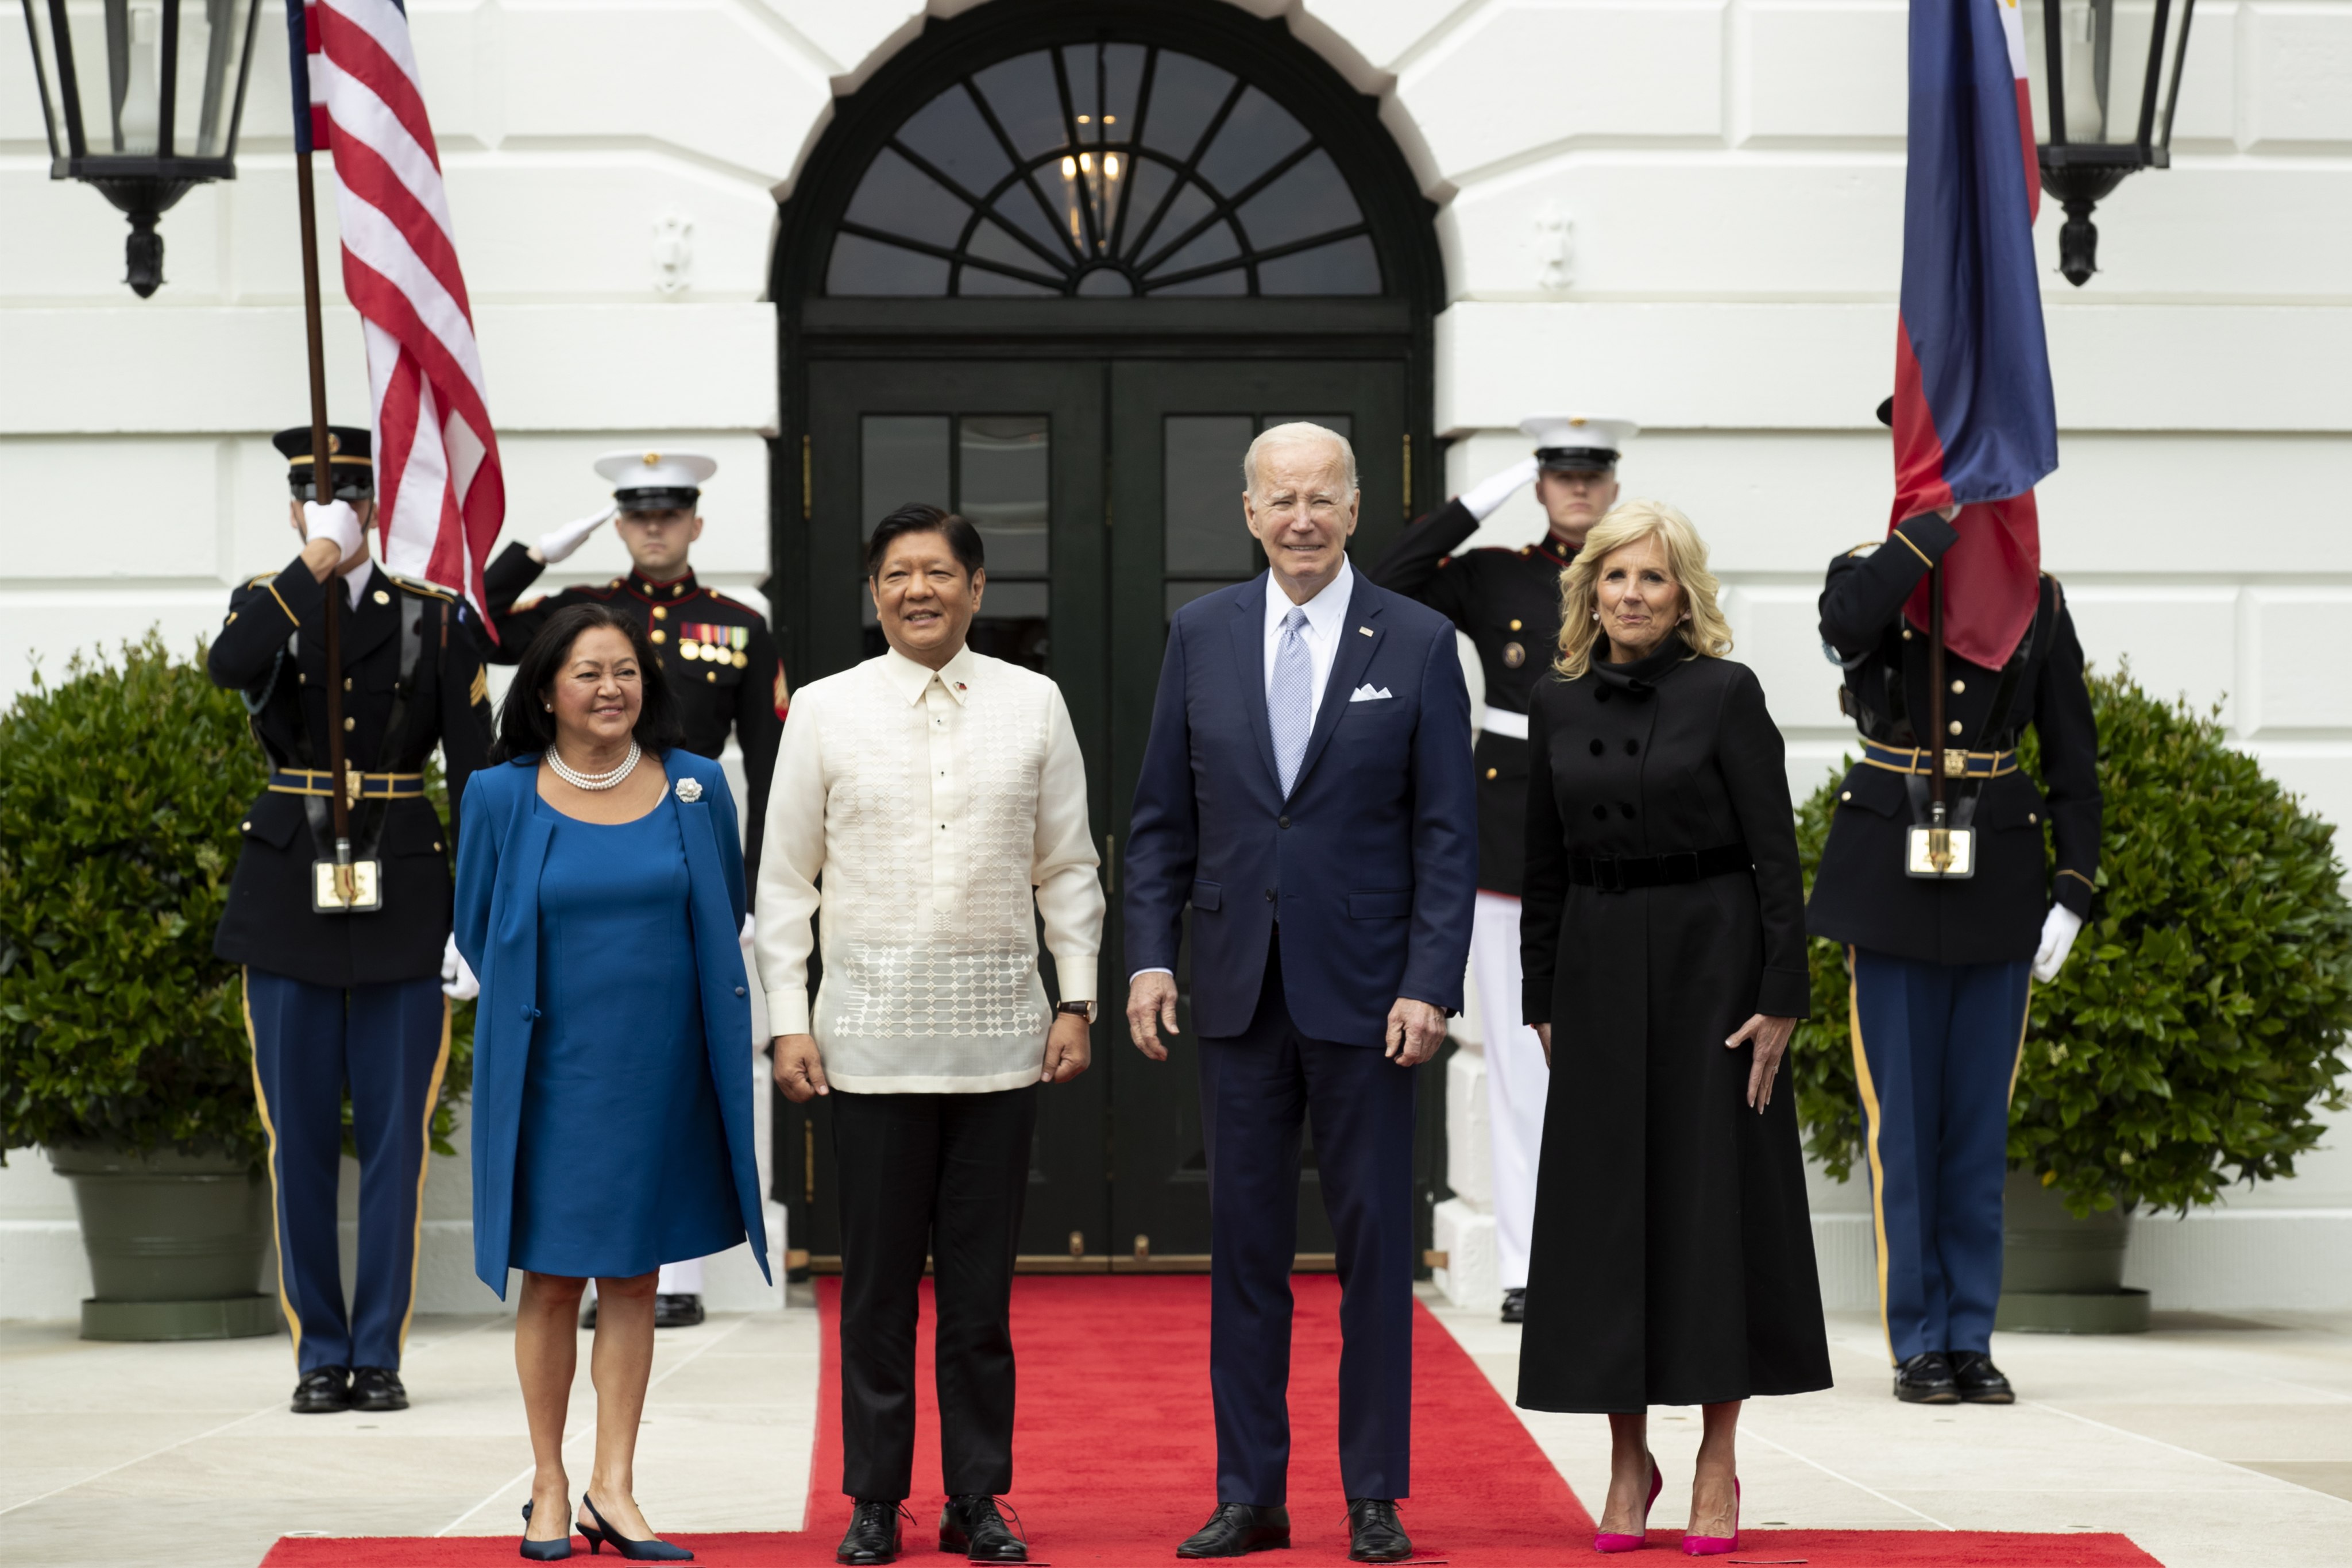 US President Joe Biden and First Lady Jill Biden welcome President of the Philippines, Ferdinand Marcos Jr, and his wife Louise Araneta-Marcos at the South Lawn of the White House. Photo: EPA-EFE